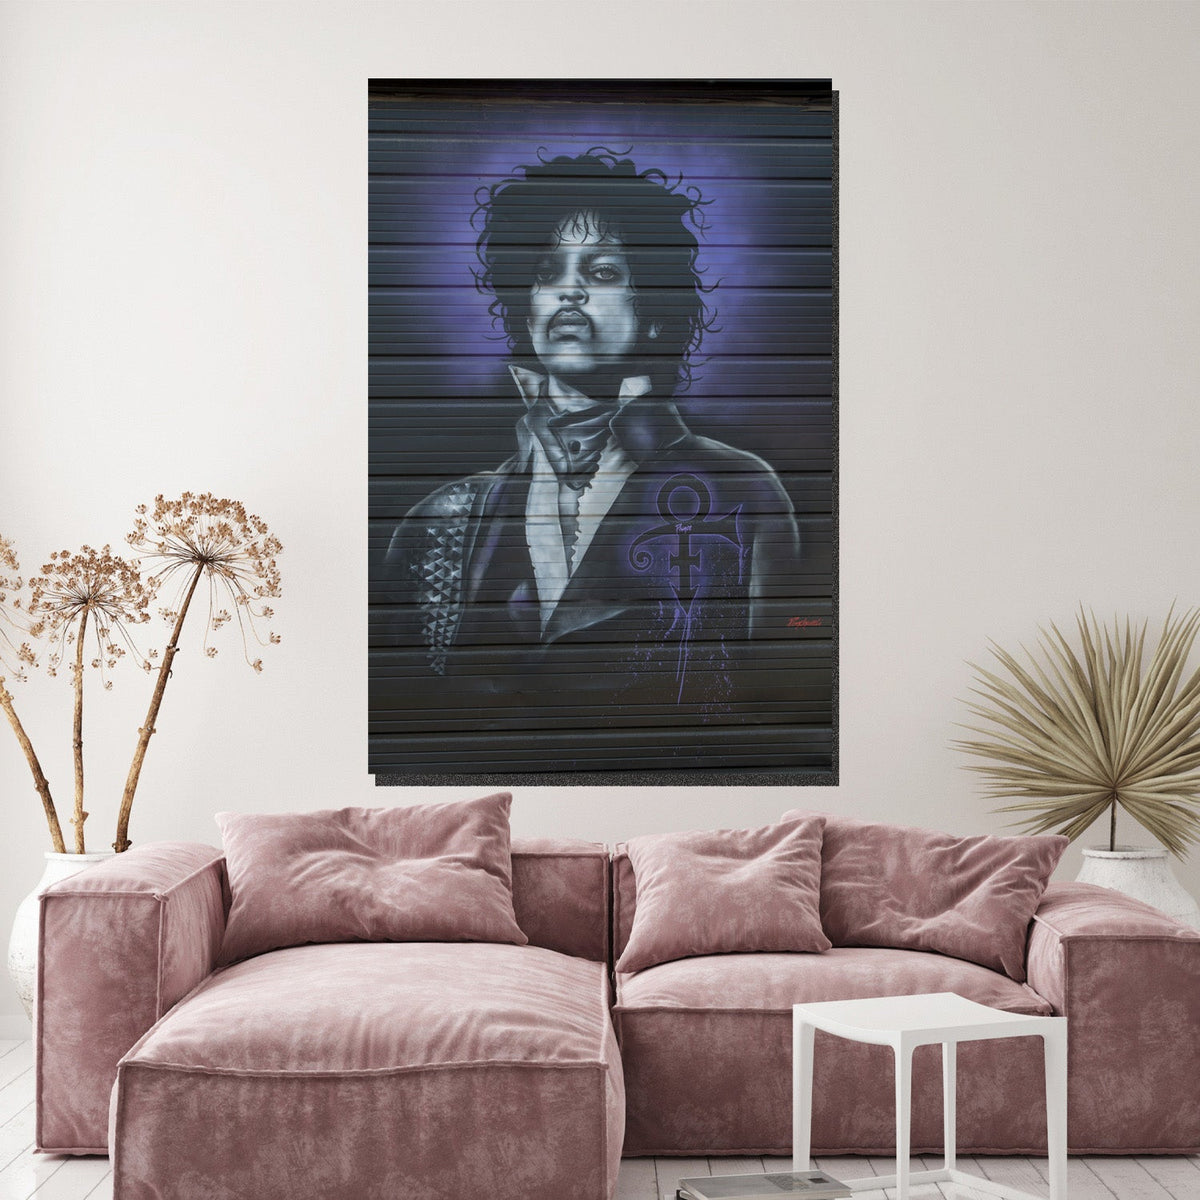 https://cdn.shopify.com/s/files/1/0387/9986/8044/products/PrinceCanvasArtPrintStretched-1.jpg